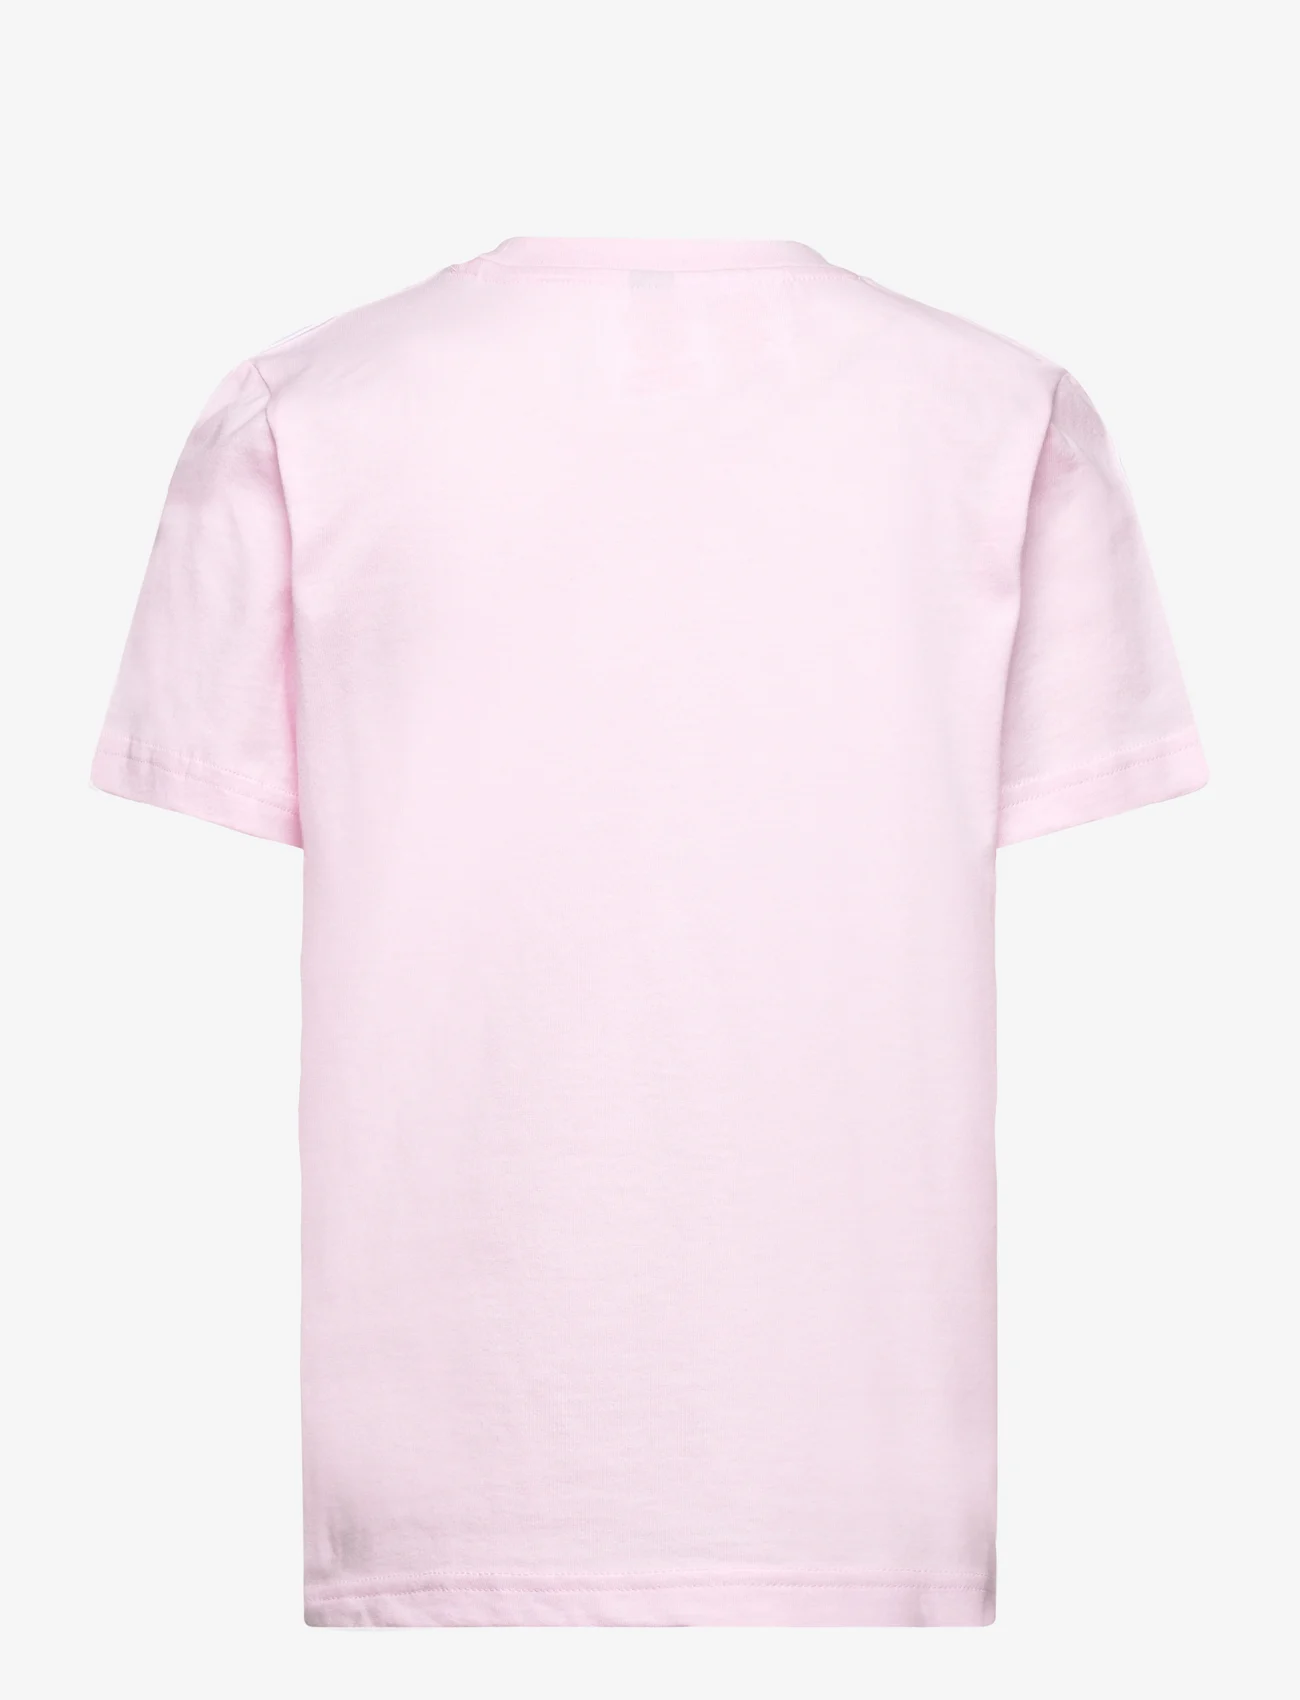 adidas Performance - LK 3S CO TEE - short-sleeved t-shirts - clpink/white - 1